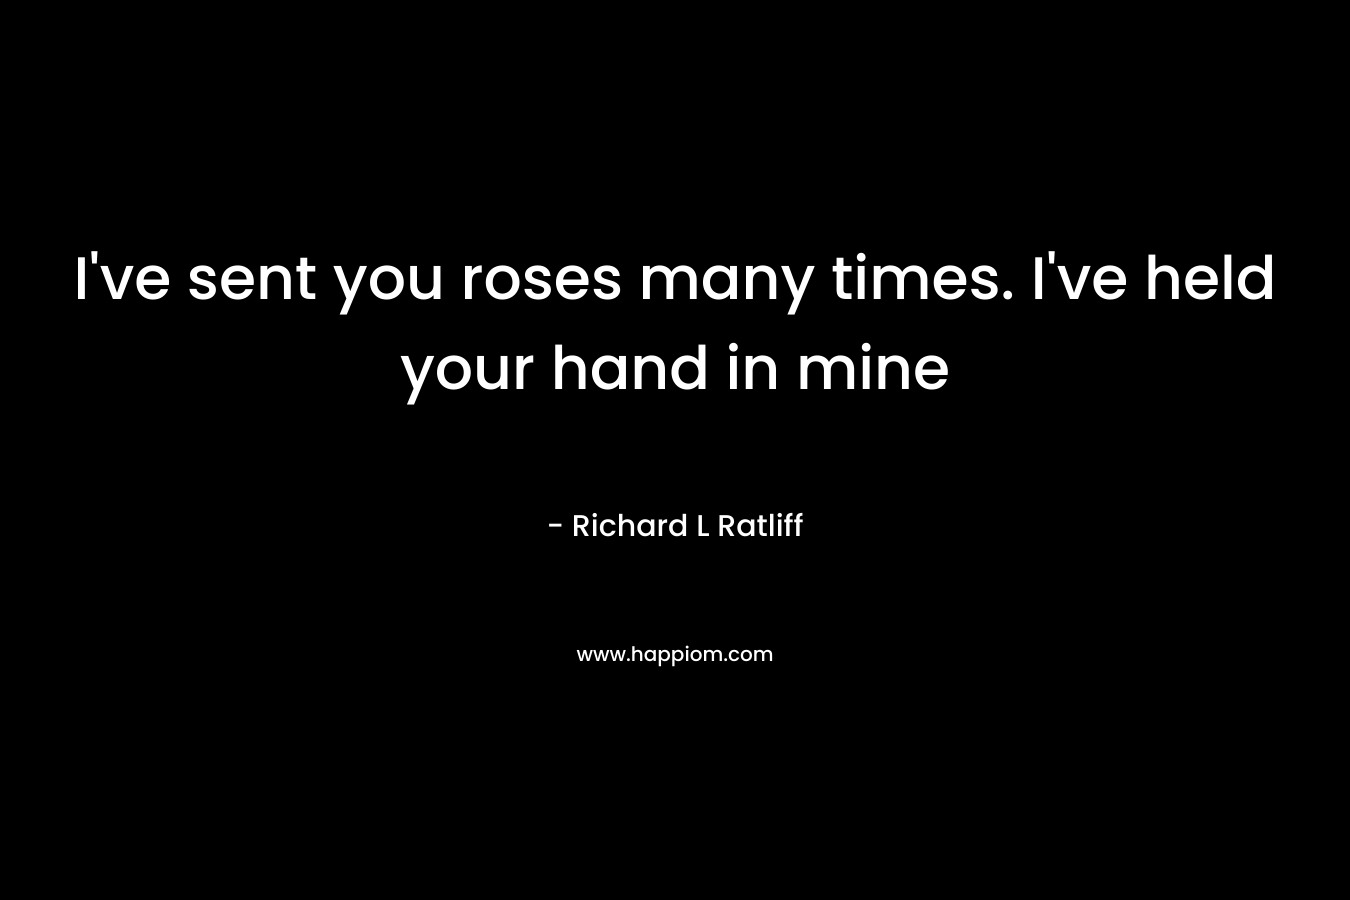 I've sent you roses many times. I've held your hand in mine